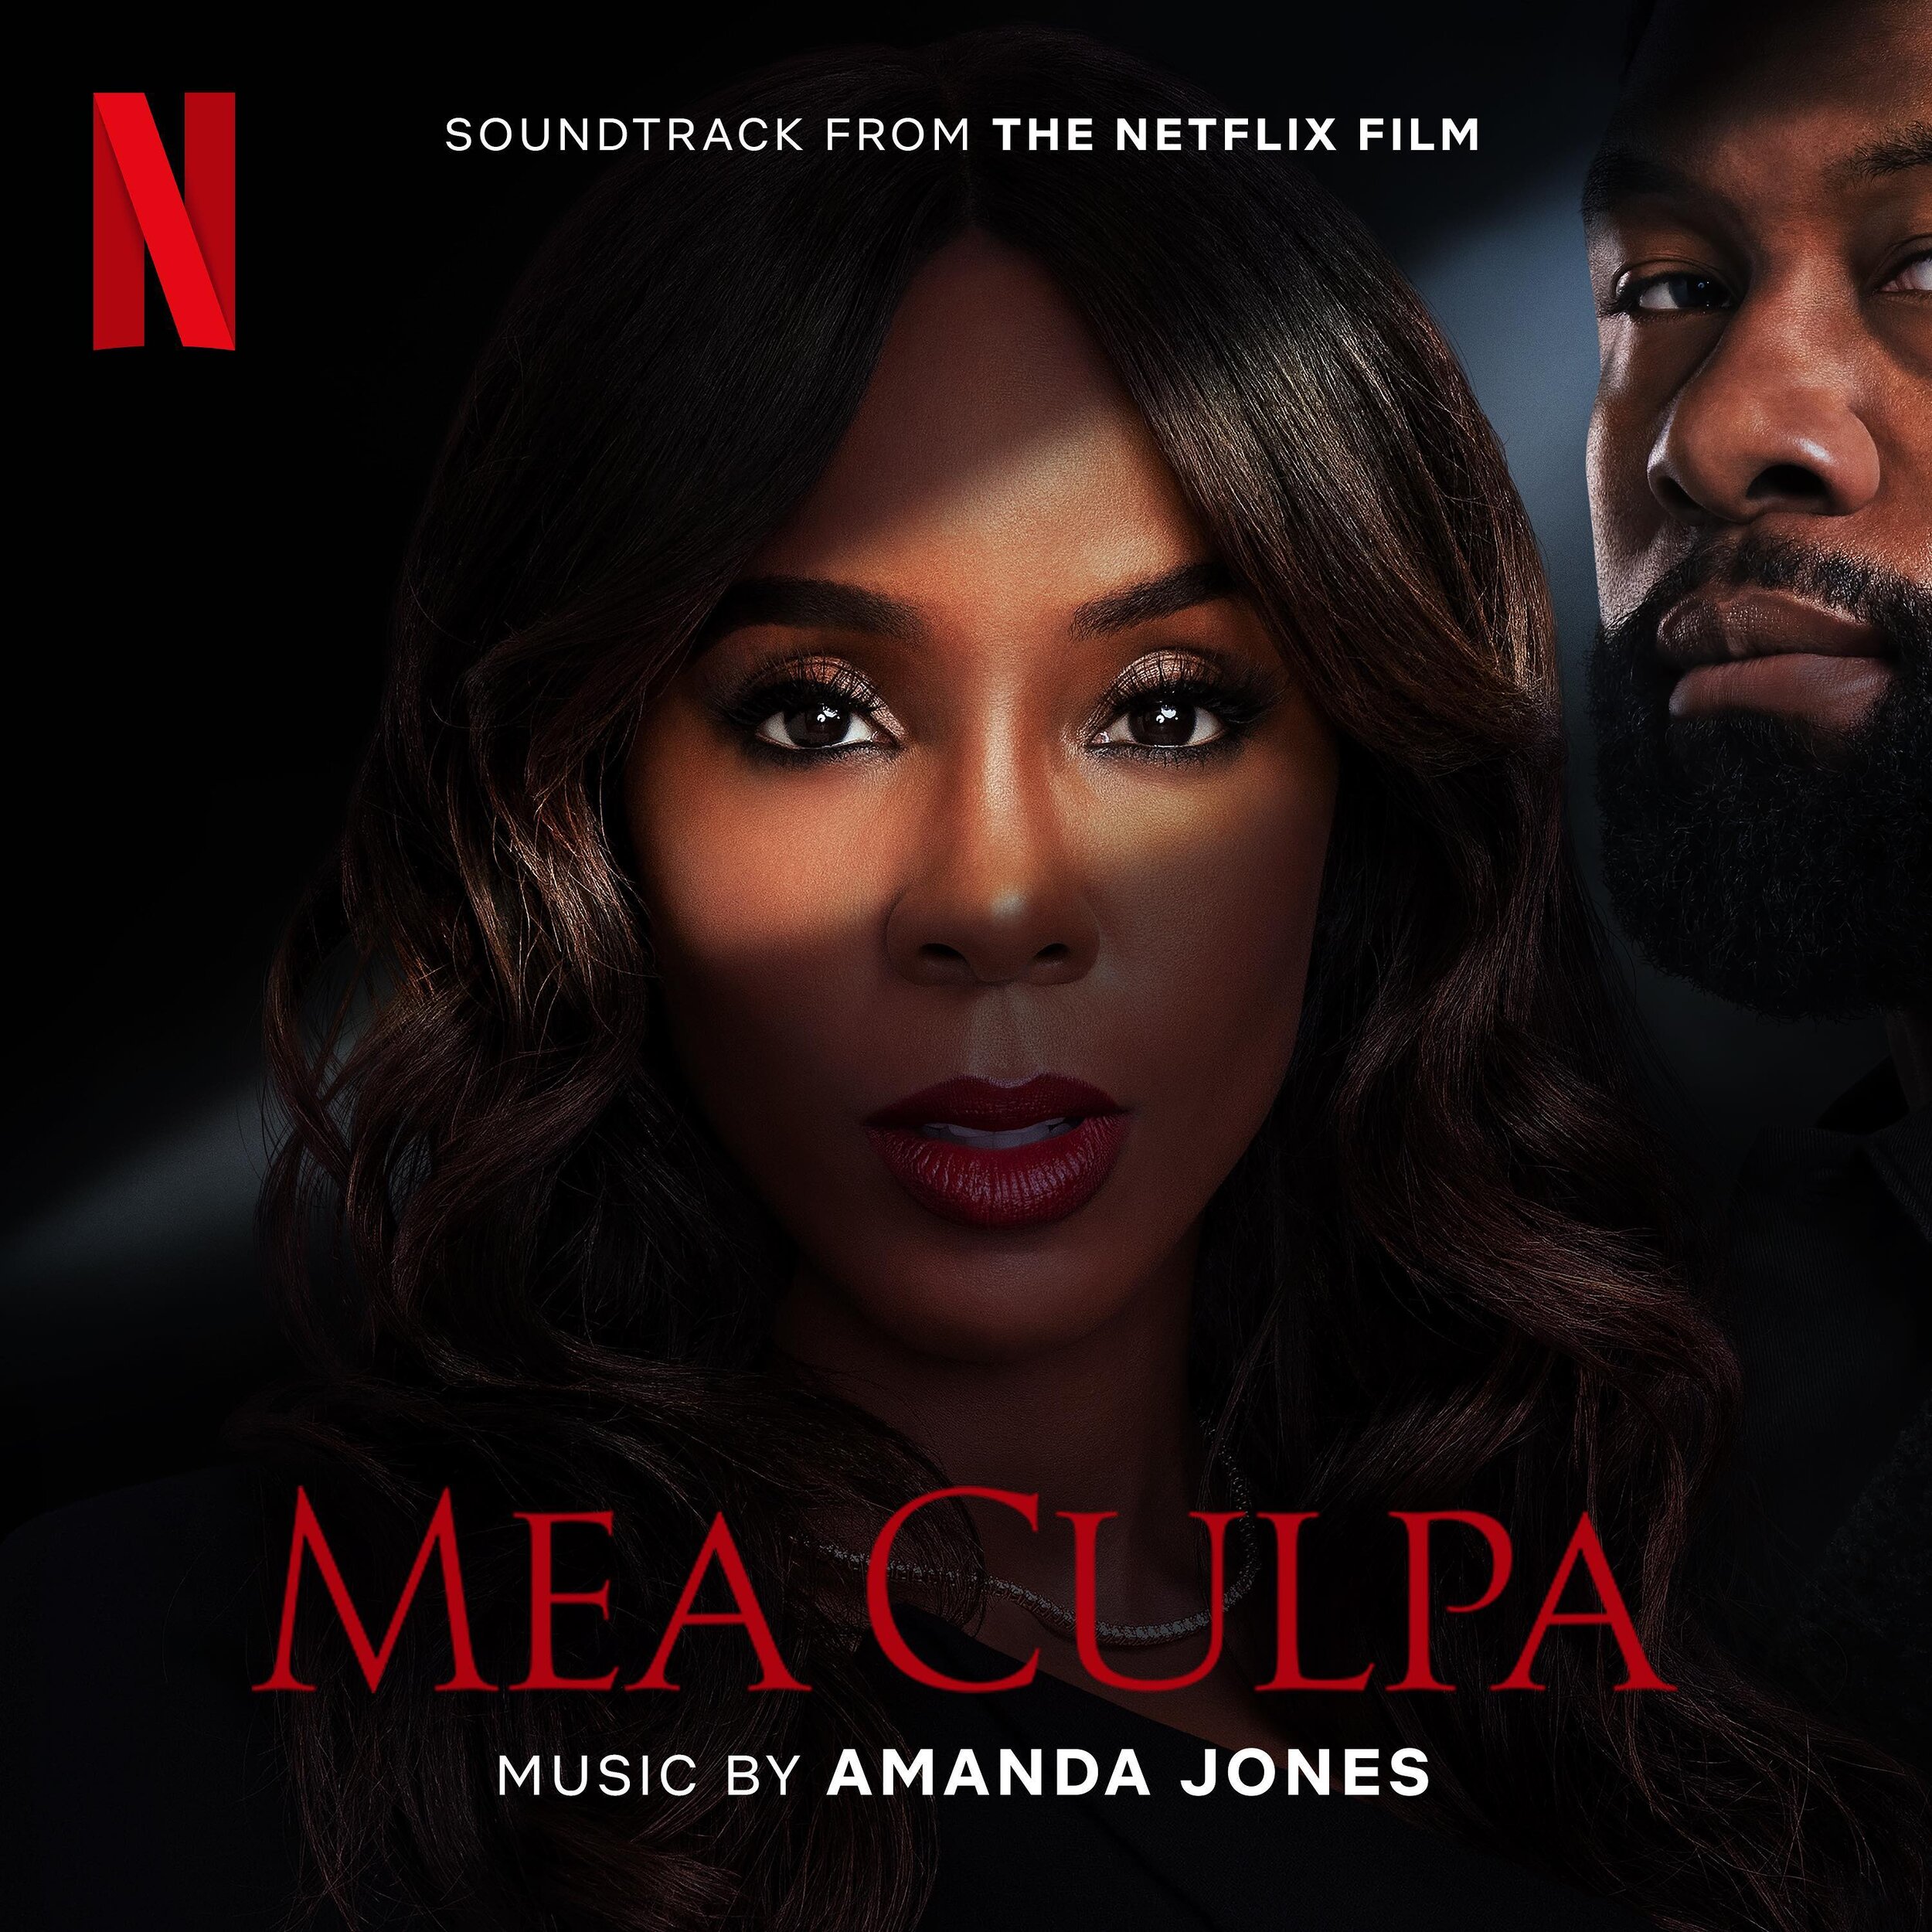 MEA CULPA SOUNDTRACK 🌹 OUT NOW 🌹

Thank you @tylerperry @kellyrowland @netflix So excited for the world to hear this thrilling and sexy score.
STREAMING NOW ON YOUR FAV MUSIC PLATFORMS🌹

Massive thanks to my incredible music team. Enjoy the INSANE